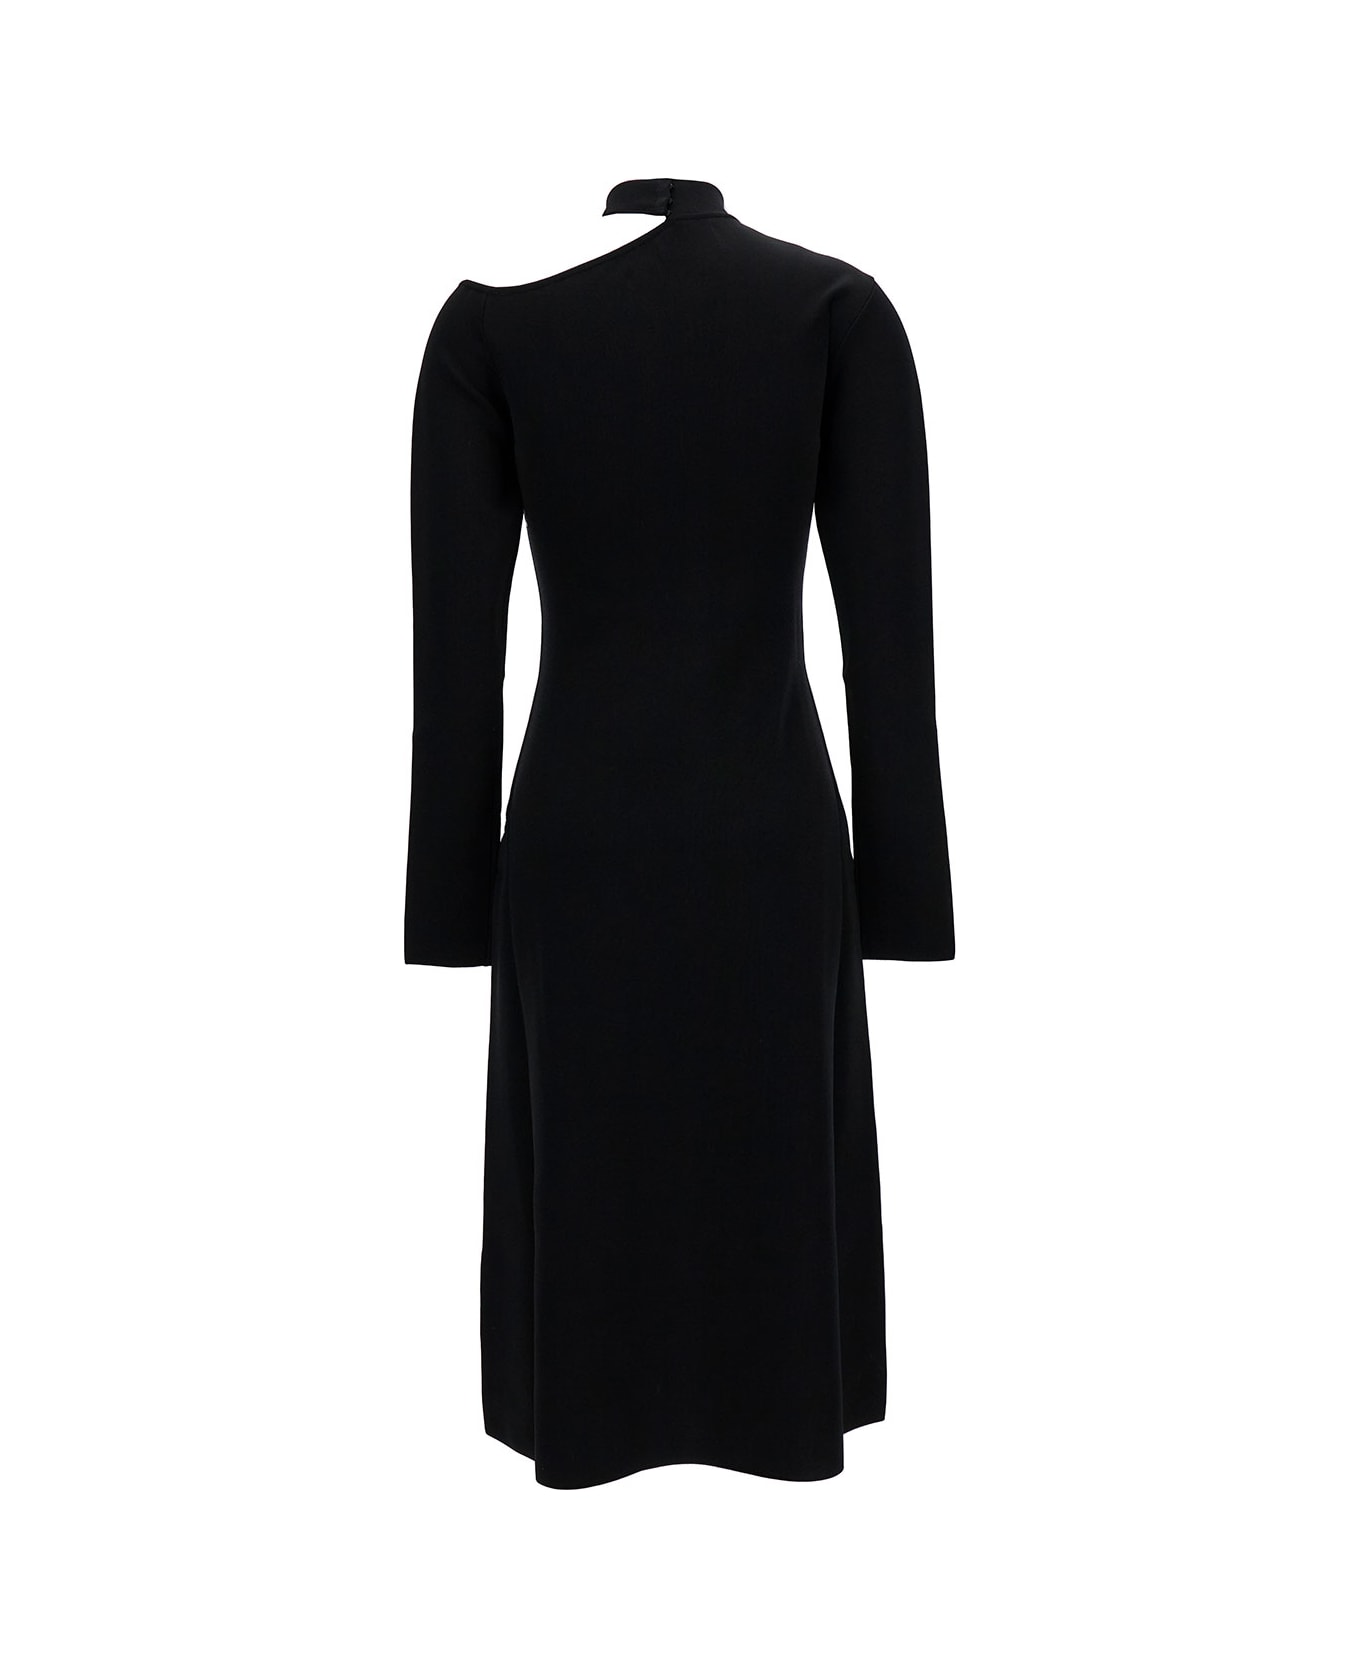 Ferragamo Midi Black Dress With Cut-out And Long Sleeve In Viscose Blend Woman - Black ワンピース＆ドレス